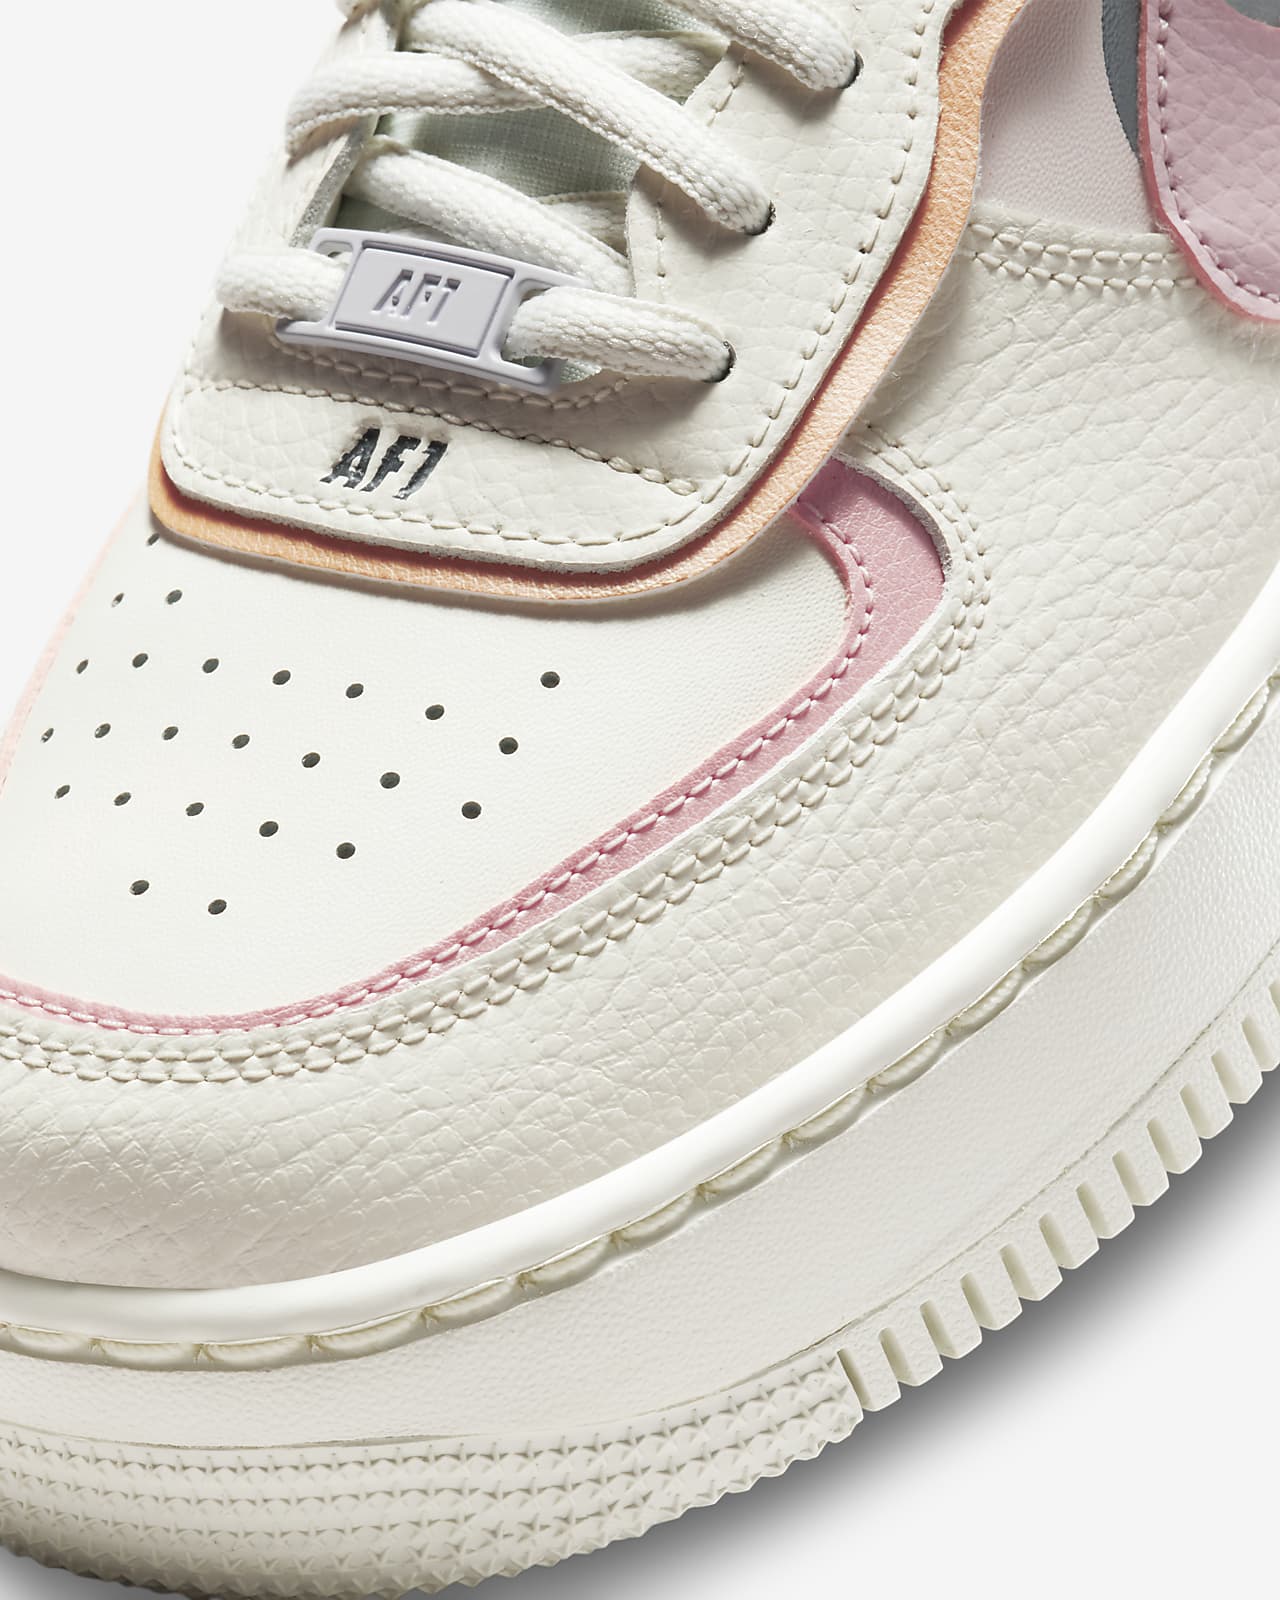 The Nike Air Force 1 Shadow puts a playful twist on a classic b